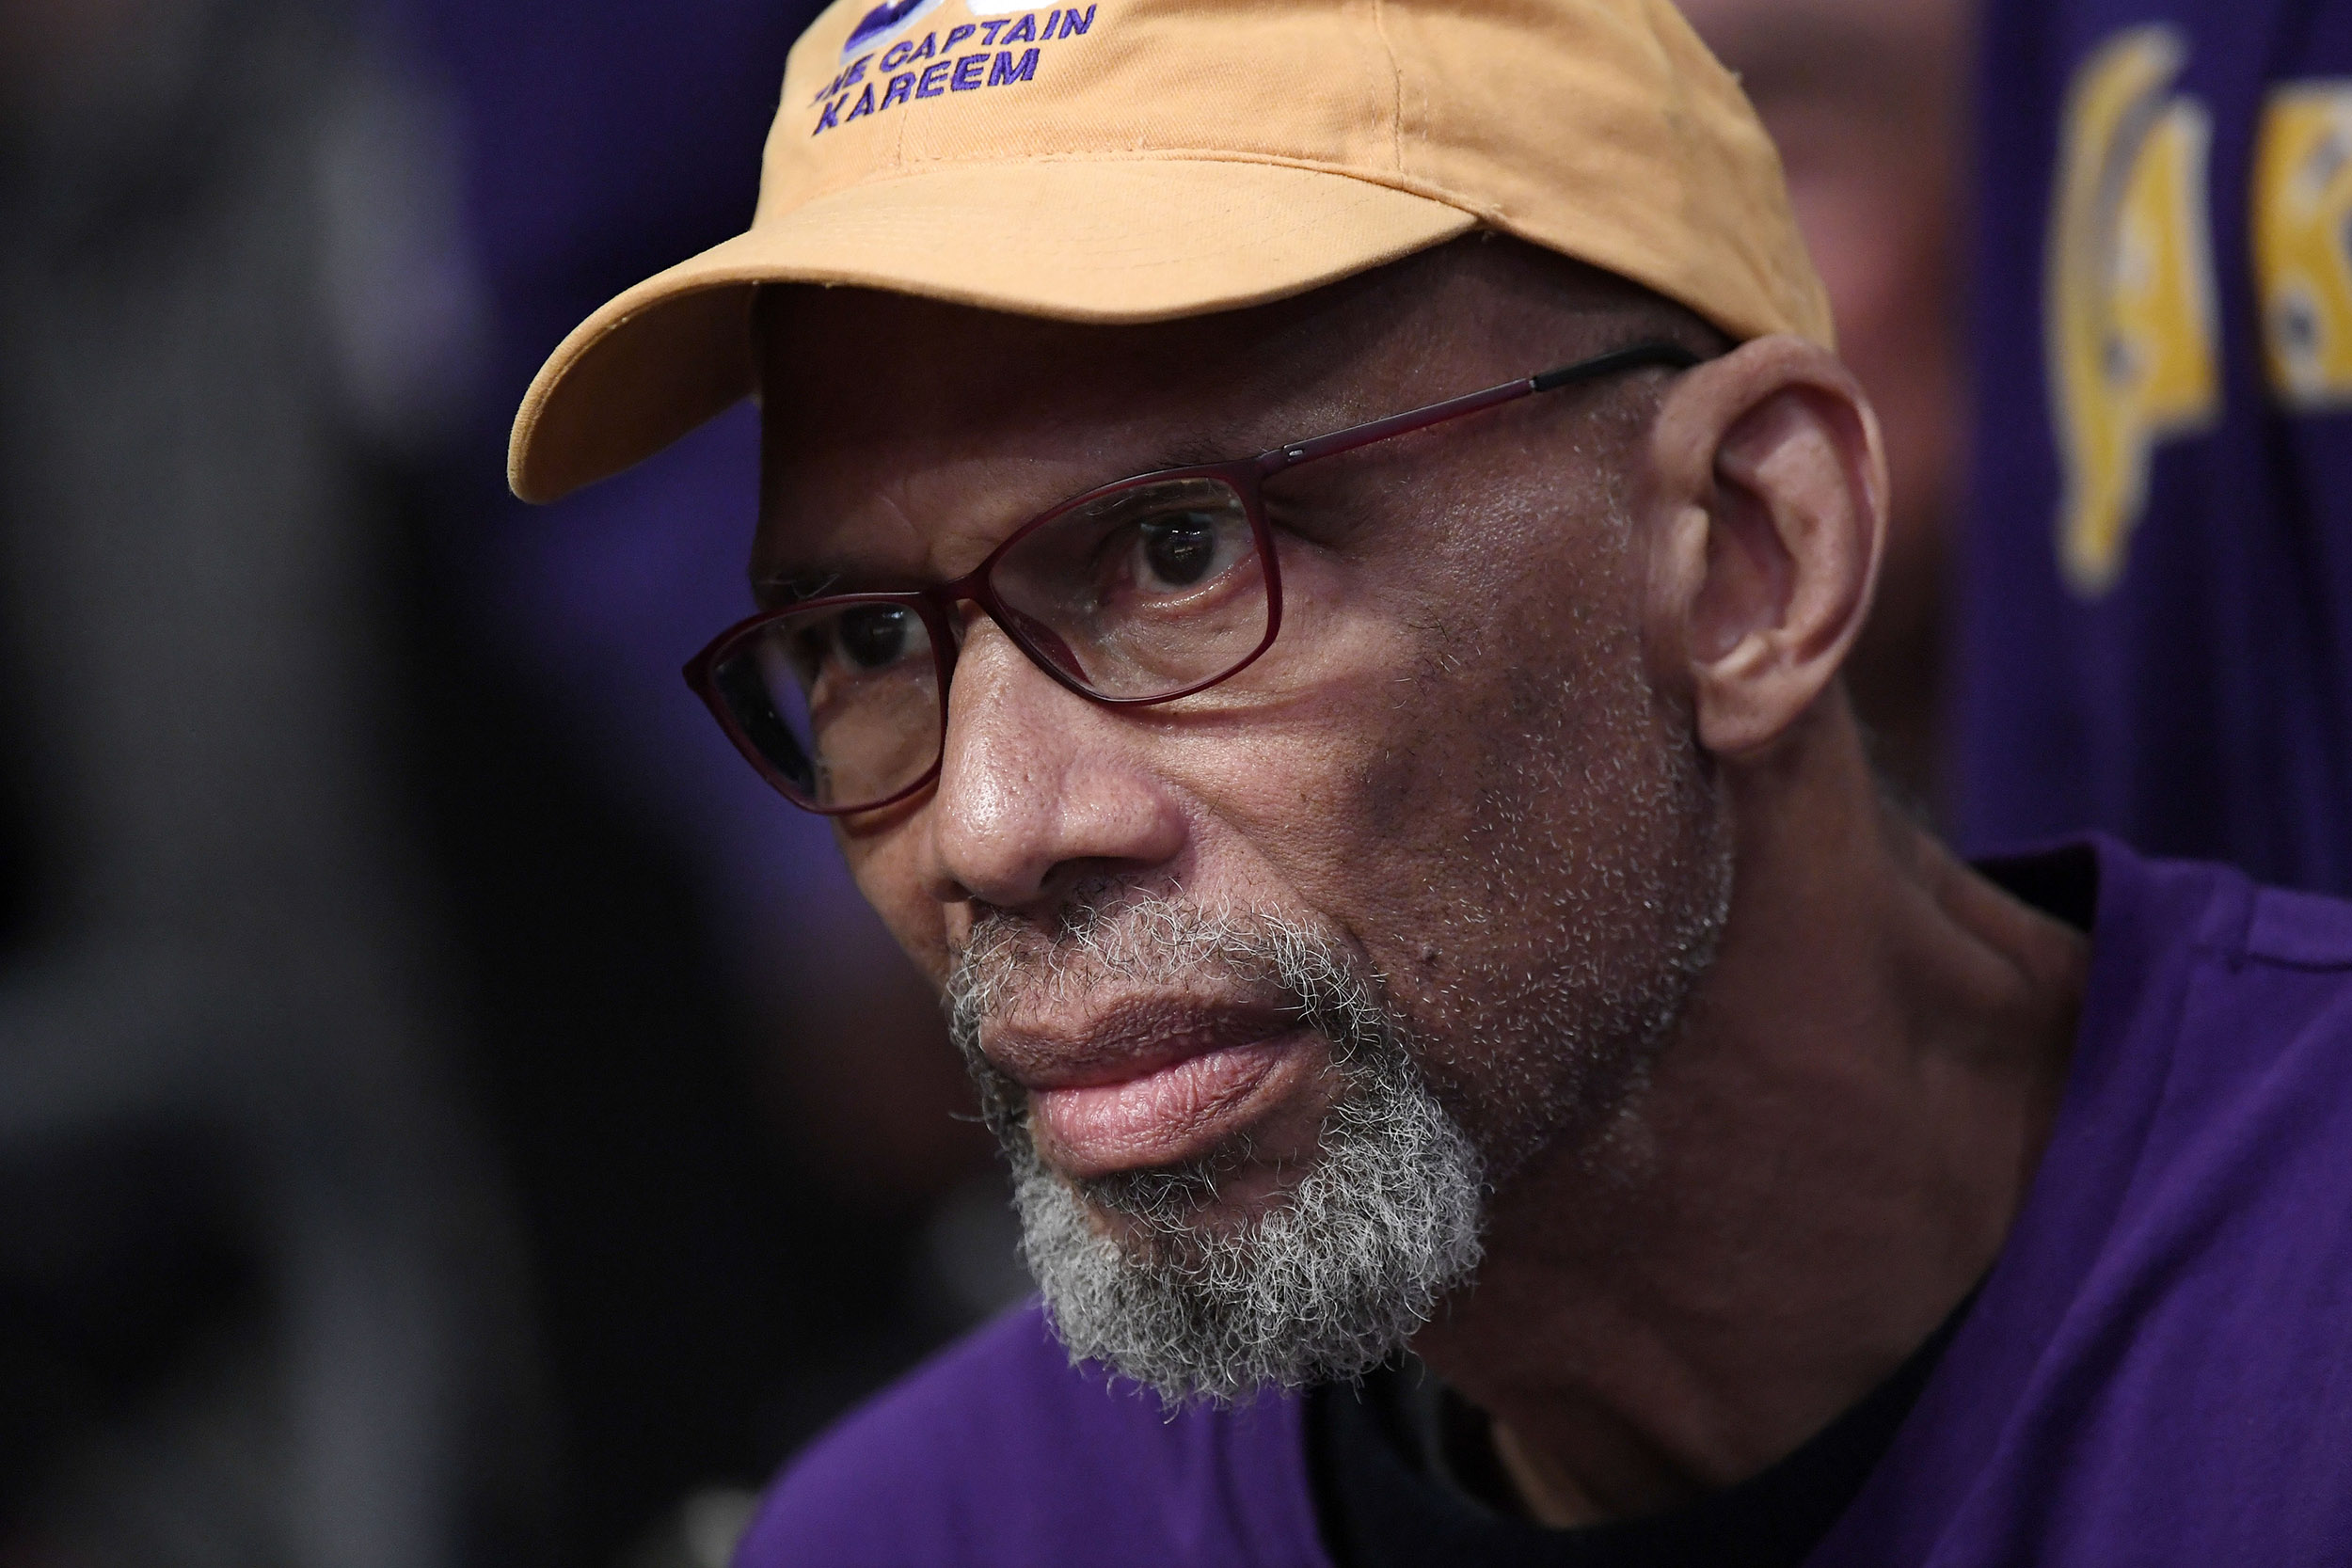 Los Angeles Lakers great Kareem Abdul-Jabbar attends the Los Angeles Lakers and Memphis Grizzlies basketball game at Staples Center in Los Angeles, on February 21. 